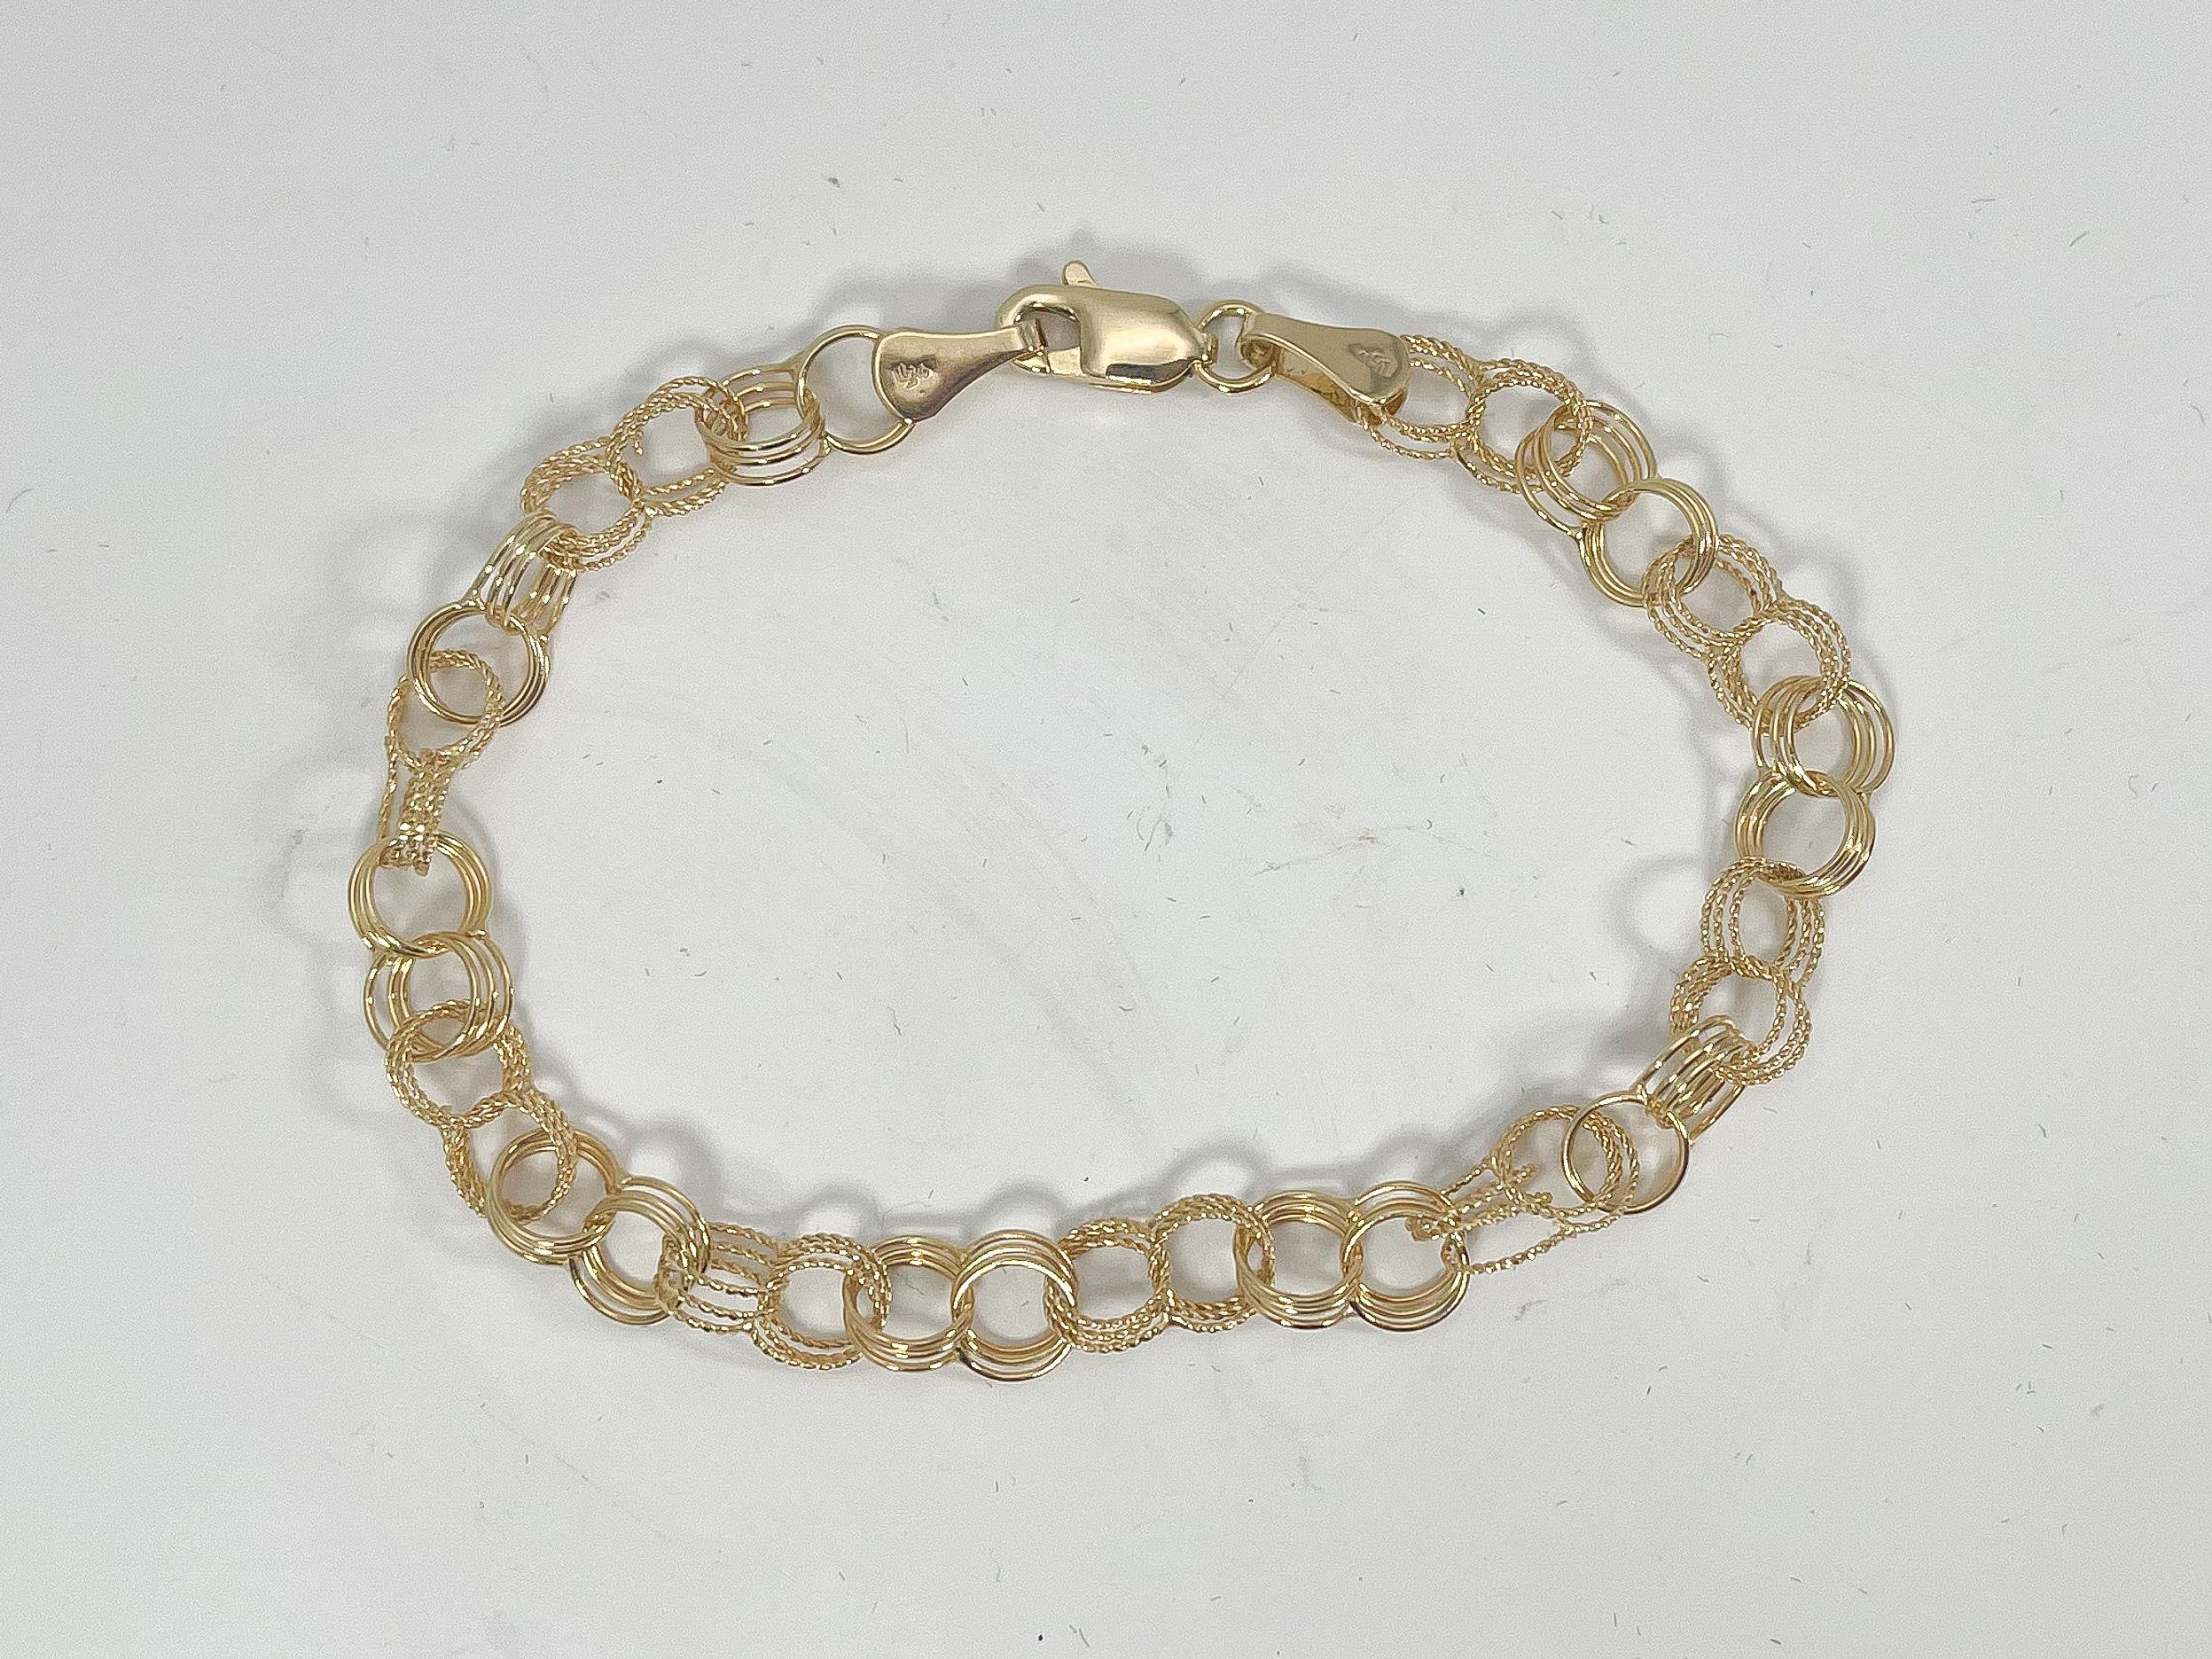 14k yellow gold charm bracelet. The bracelet comes with a lobster clasp, the width measures 5 m, has a length of 7 inches, and a total weight of 3.88 grams.